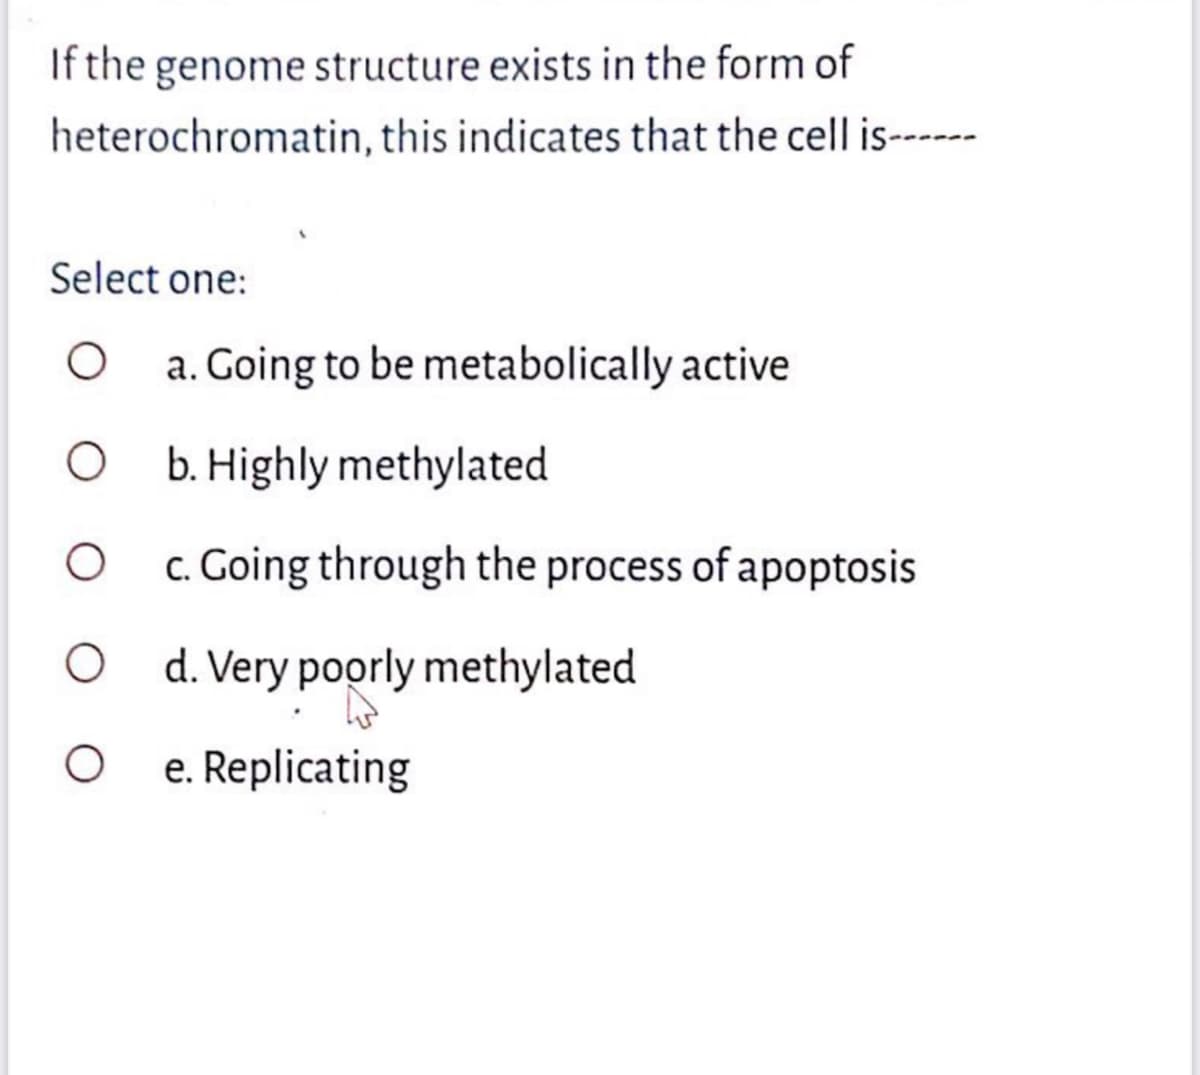 If the genome structure exists in the form of
heterochromatin, this indicates that the cell is-----
Select one:
a. Going to be metabolically active
O . Highly methylated
c. Going through the process of apoptosis
O d. Very poorly methylated
e. Replicating
